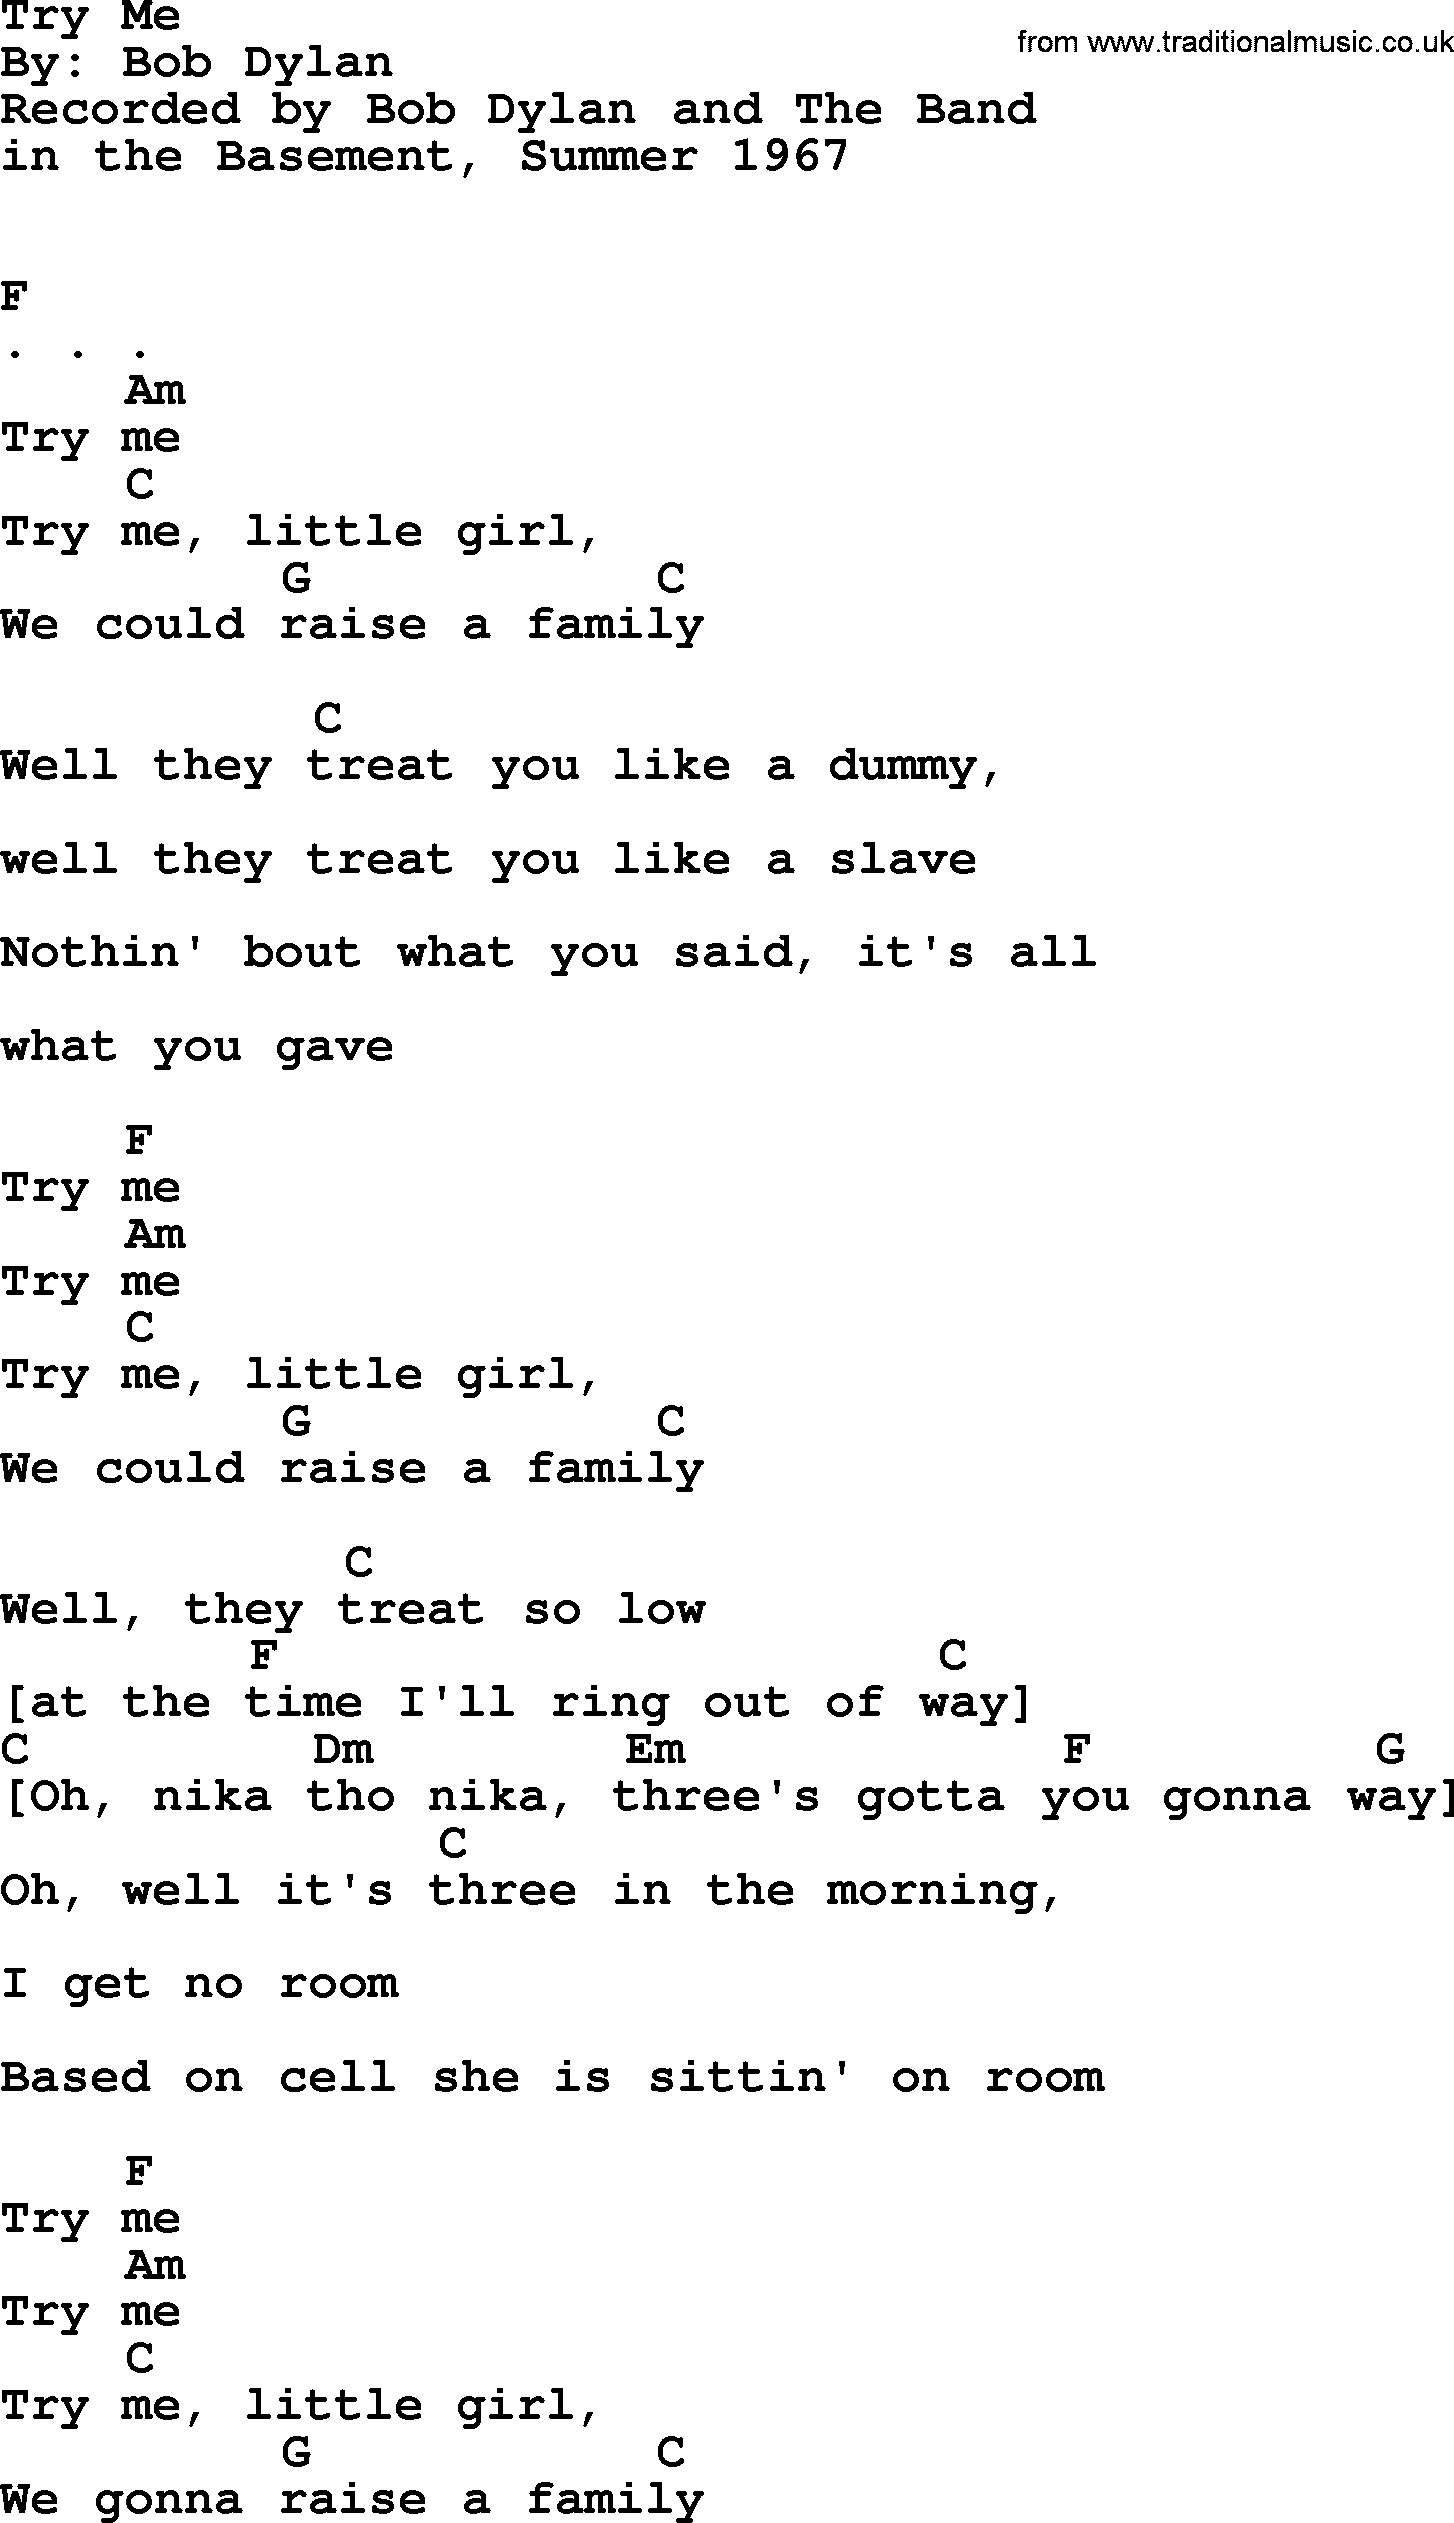 Bob Dylan song, lyrics with chords - Try Me